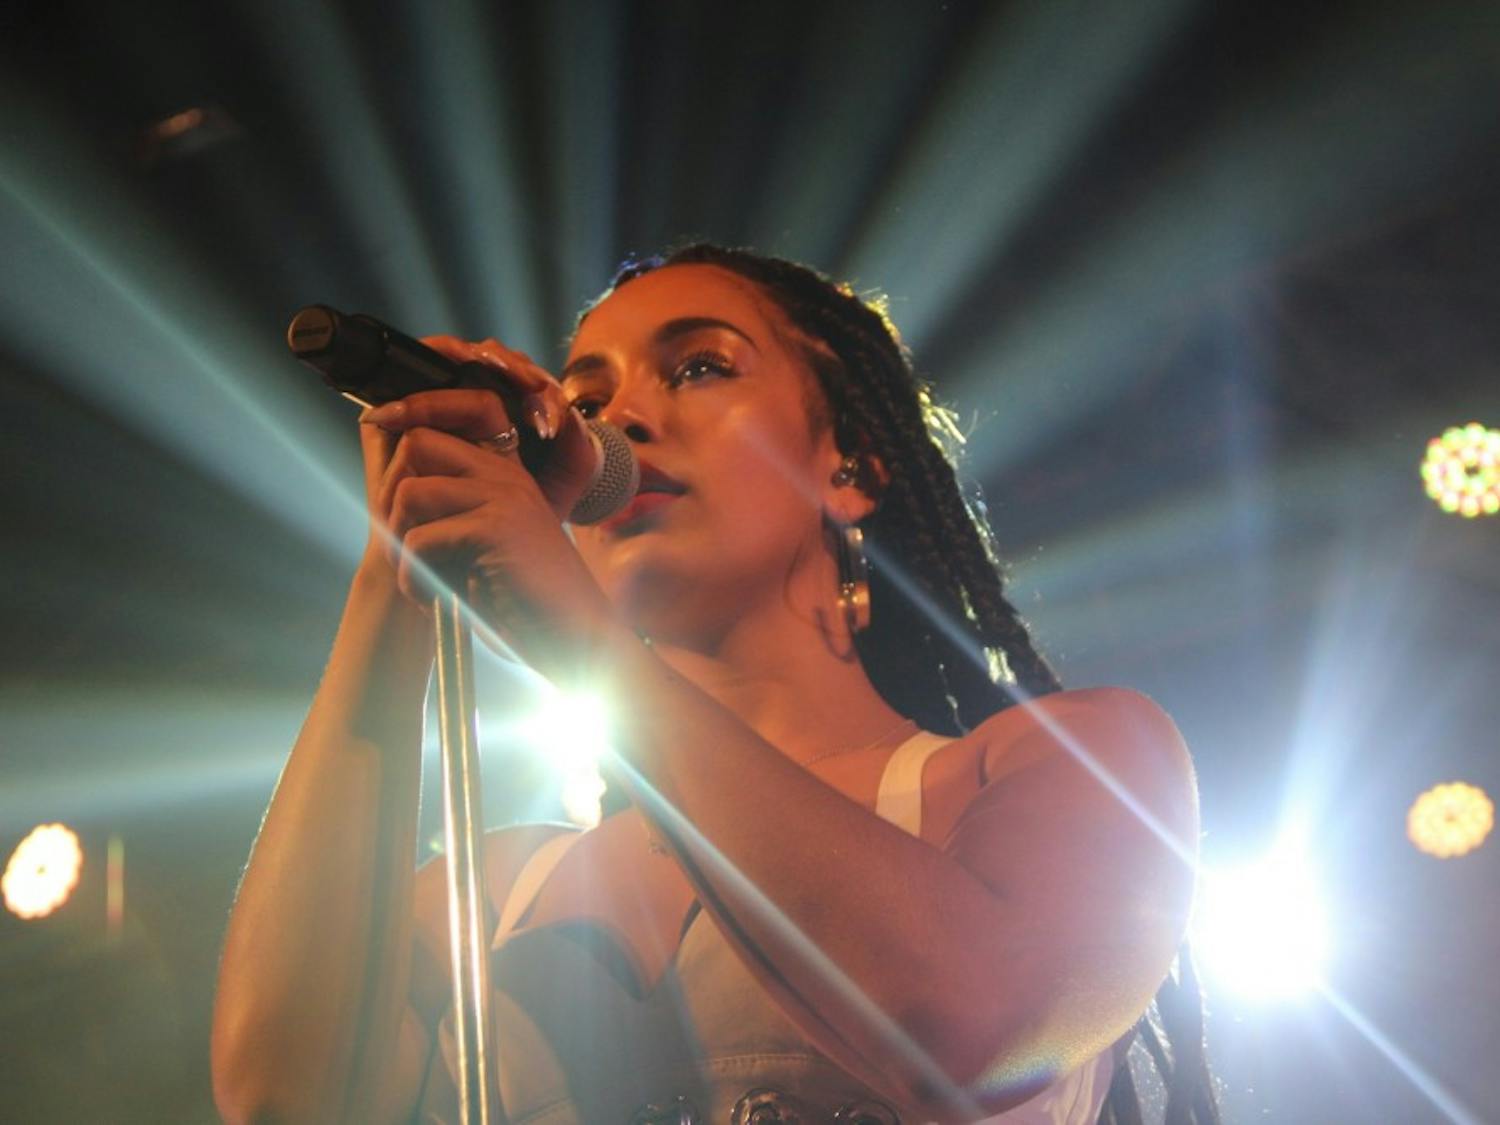 Singer Jorja Smith played The Opera House in Toronto for two sold-out shows on Saturday and Sunday. Aside from playing her notable hits, Smith threw some covers and unreleased album cuts on the setlist.